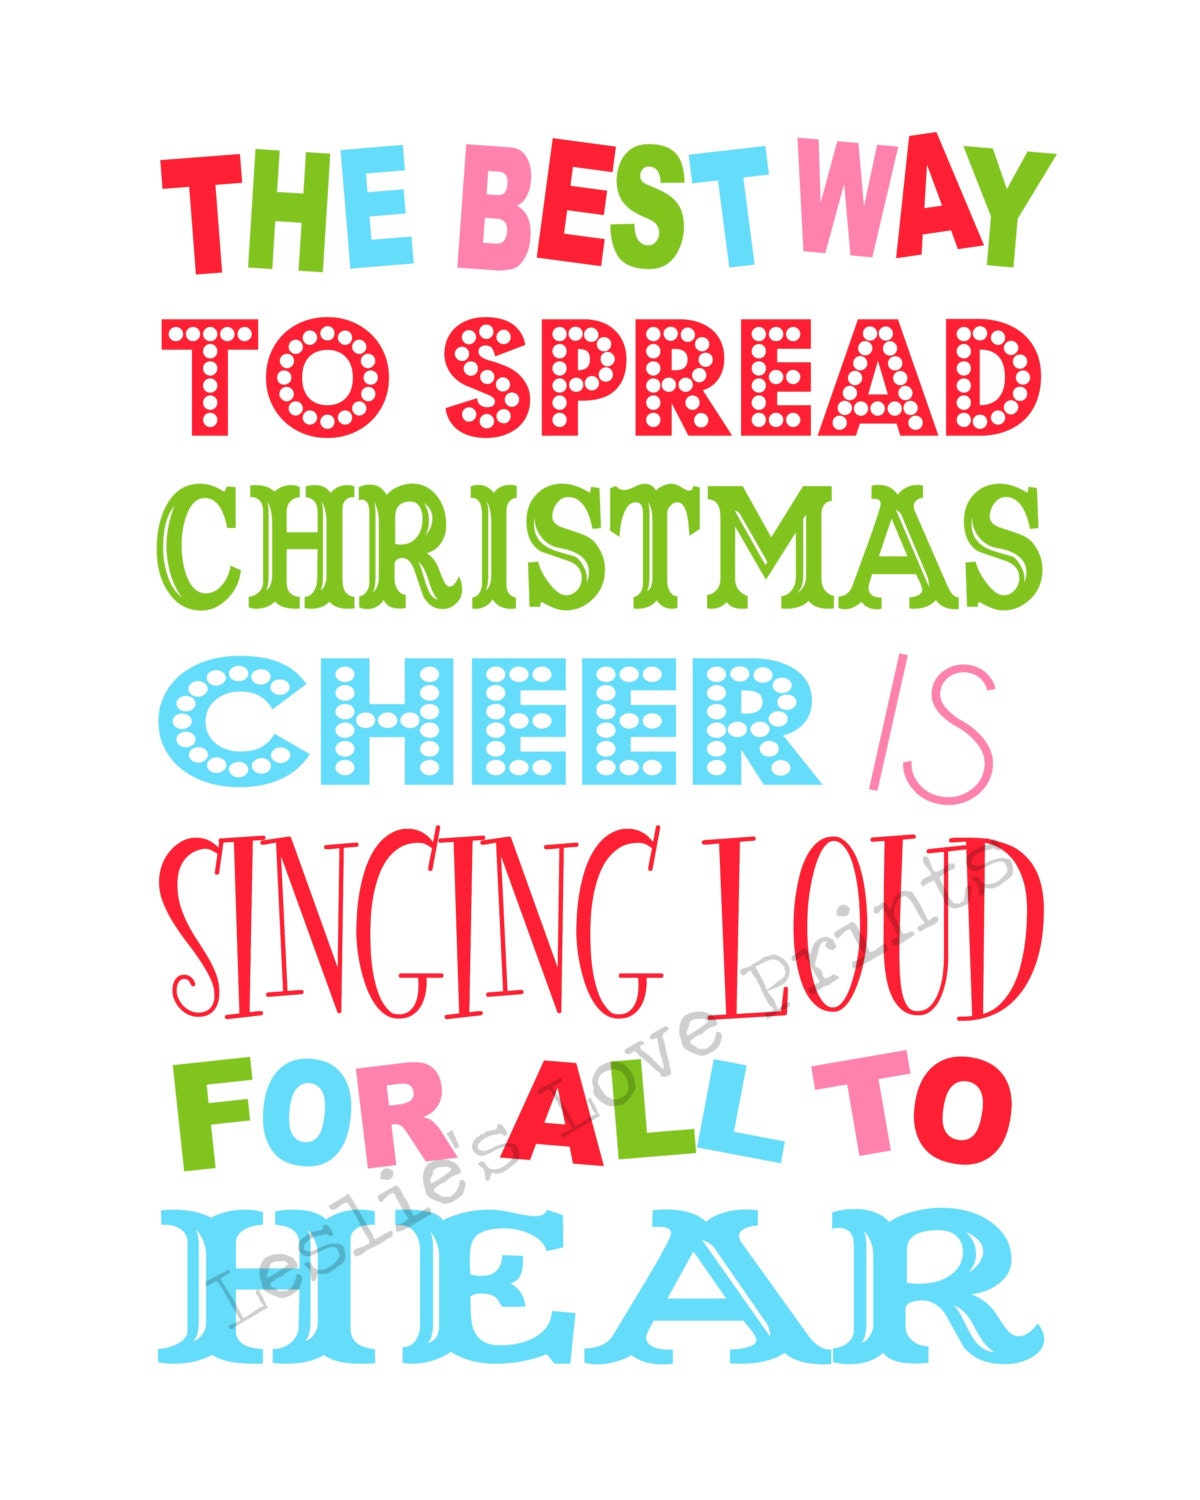 Buddy the Elf Quote Printable You Print by LeslieLovePrints